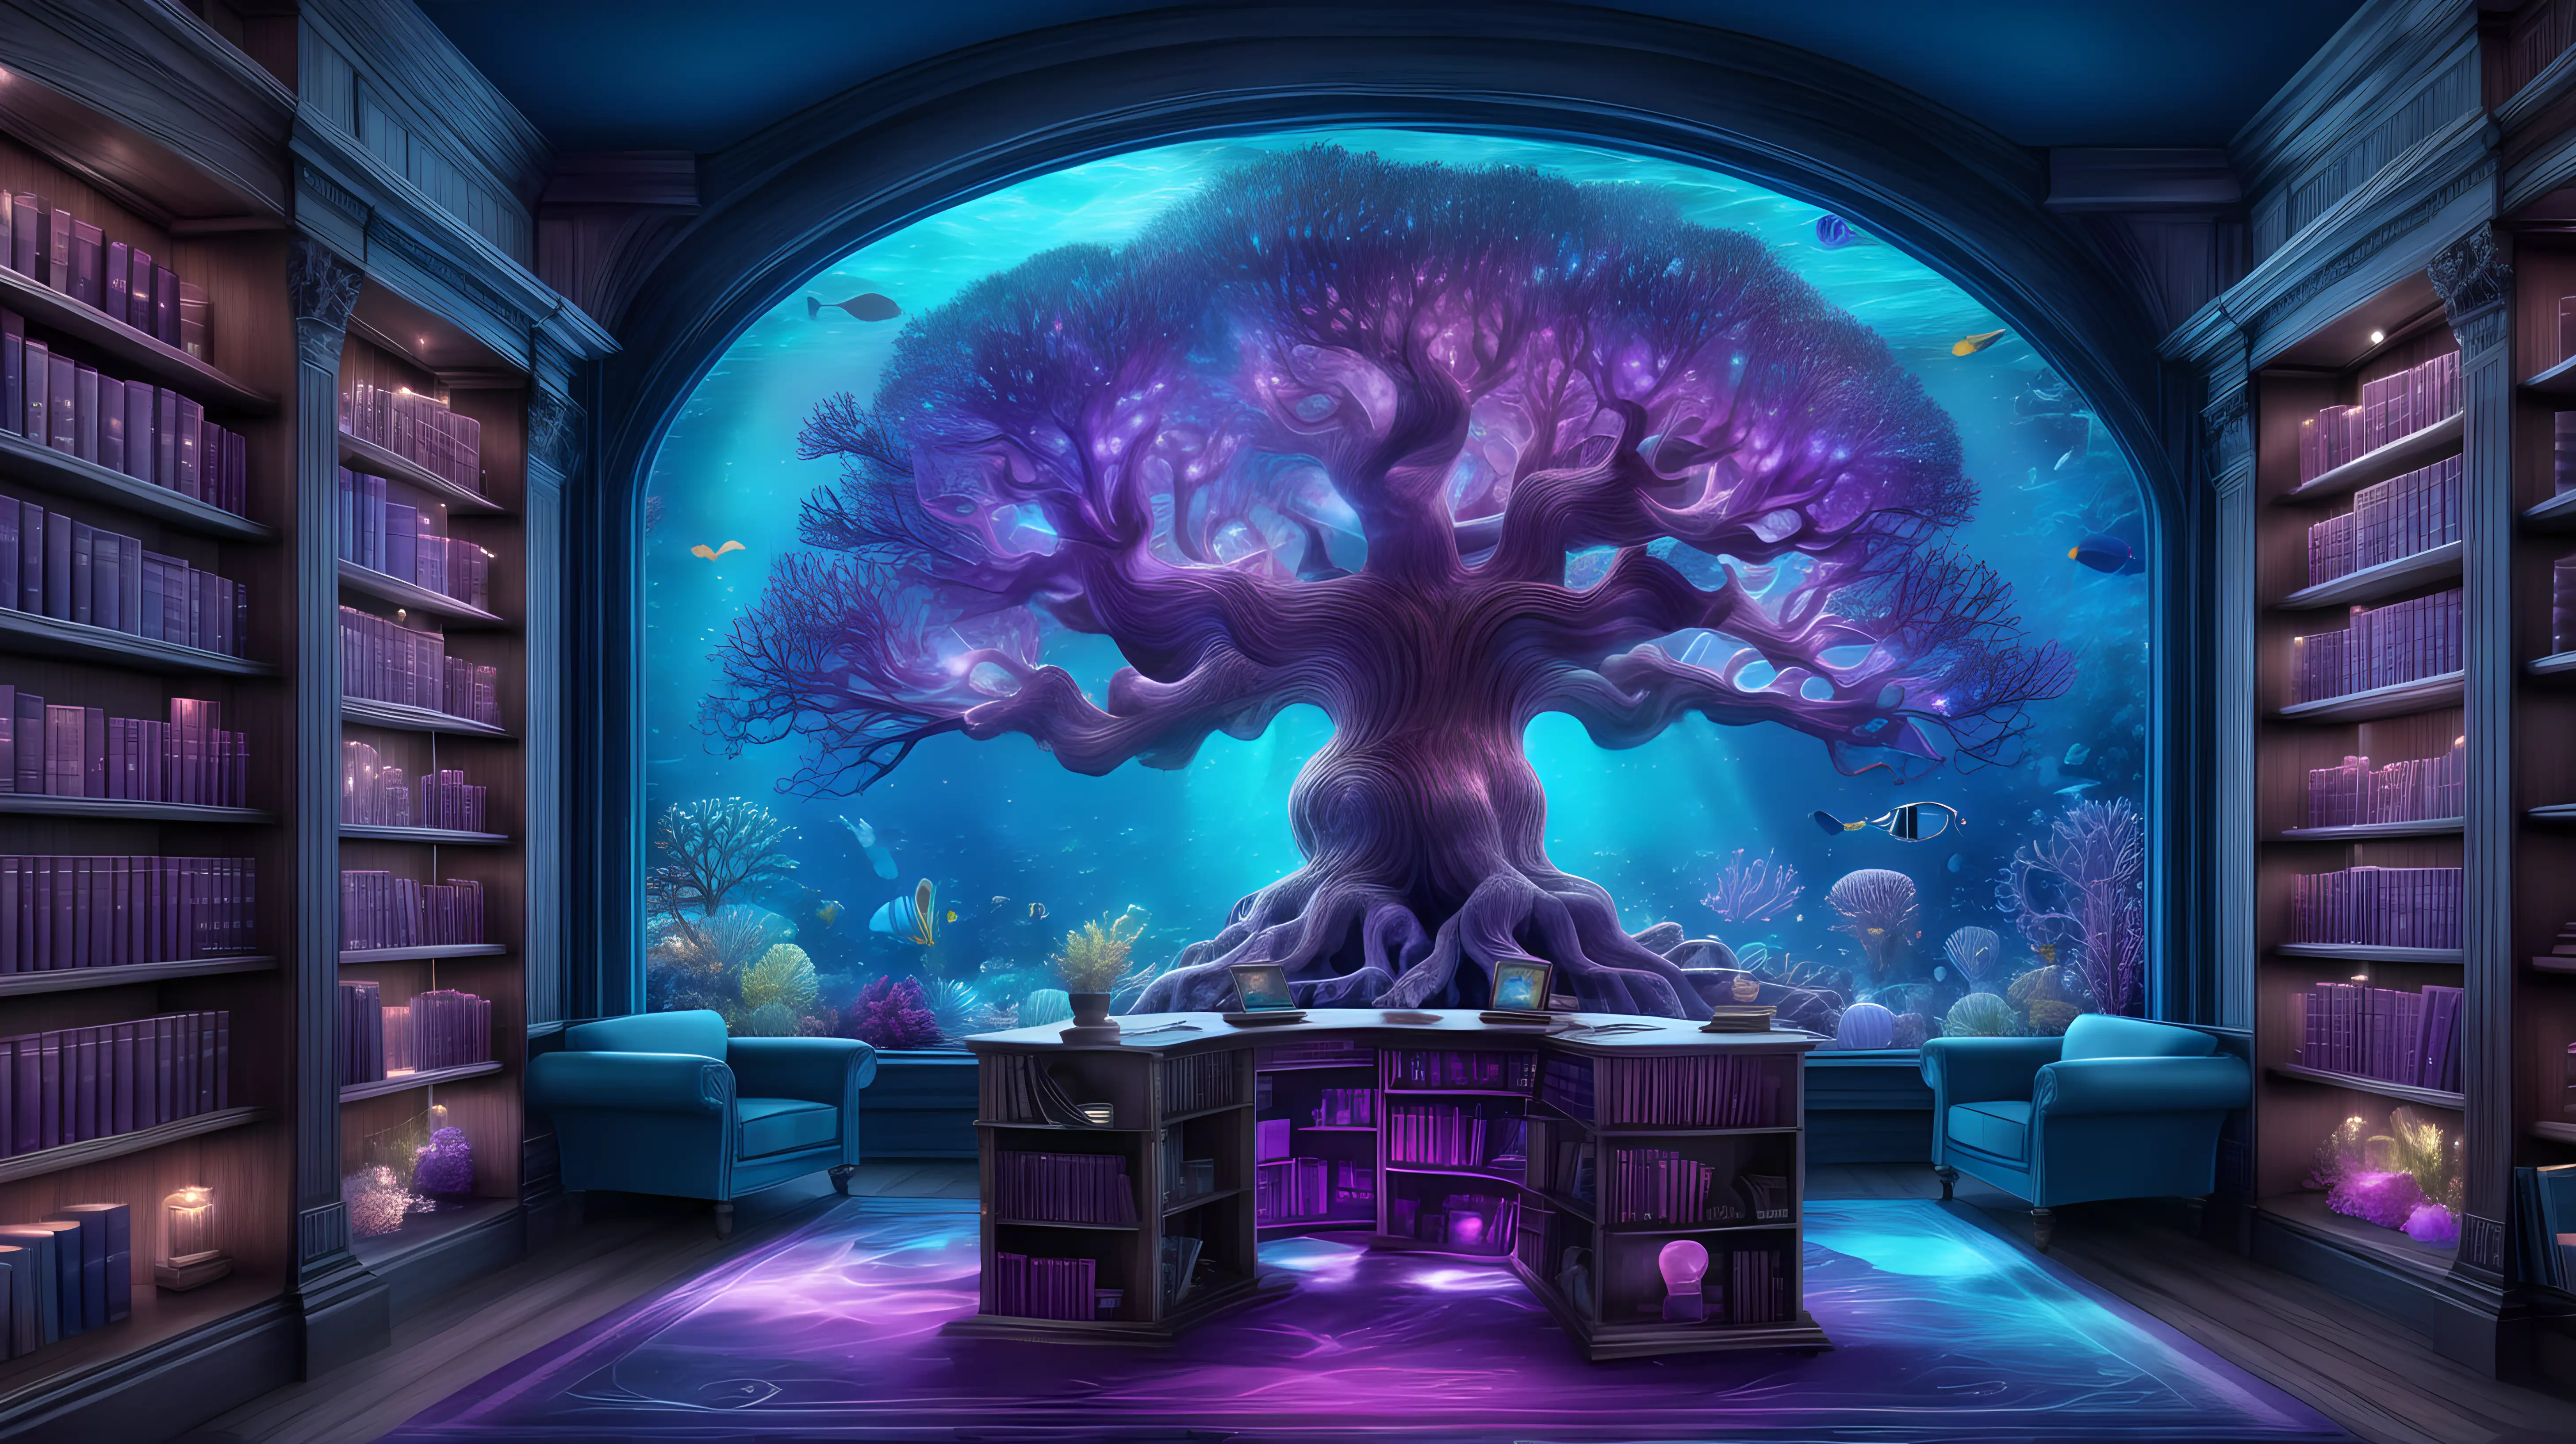 Ocean library with water-floors, a majestic-giant-magical-tree glowing-with potions and bright blues lights and bright purple lights of Blues and turquoise with purple-corals of magical potions on dark wooden bookshelves and a window showing a underwater ocean coral garden with colorful lights